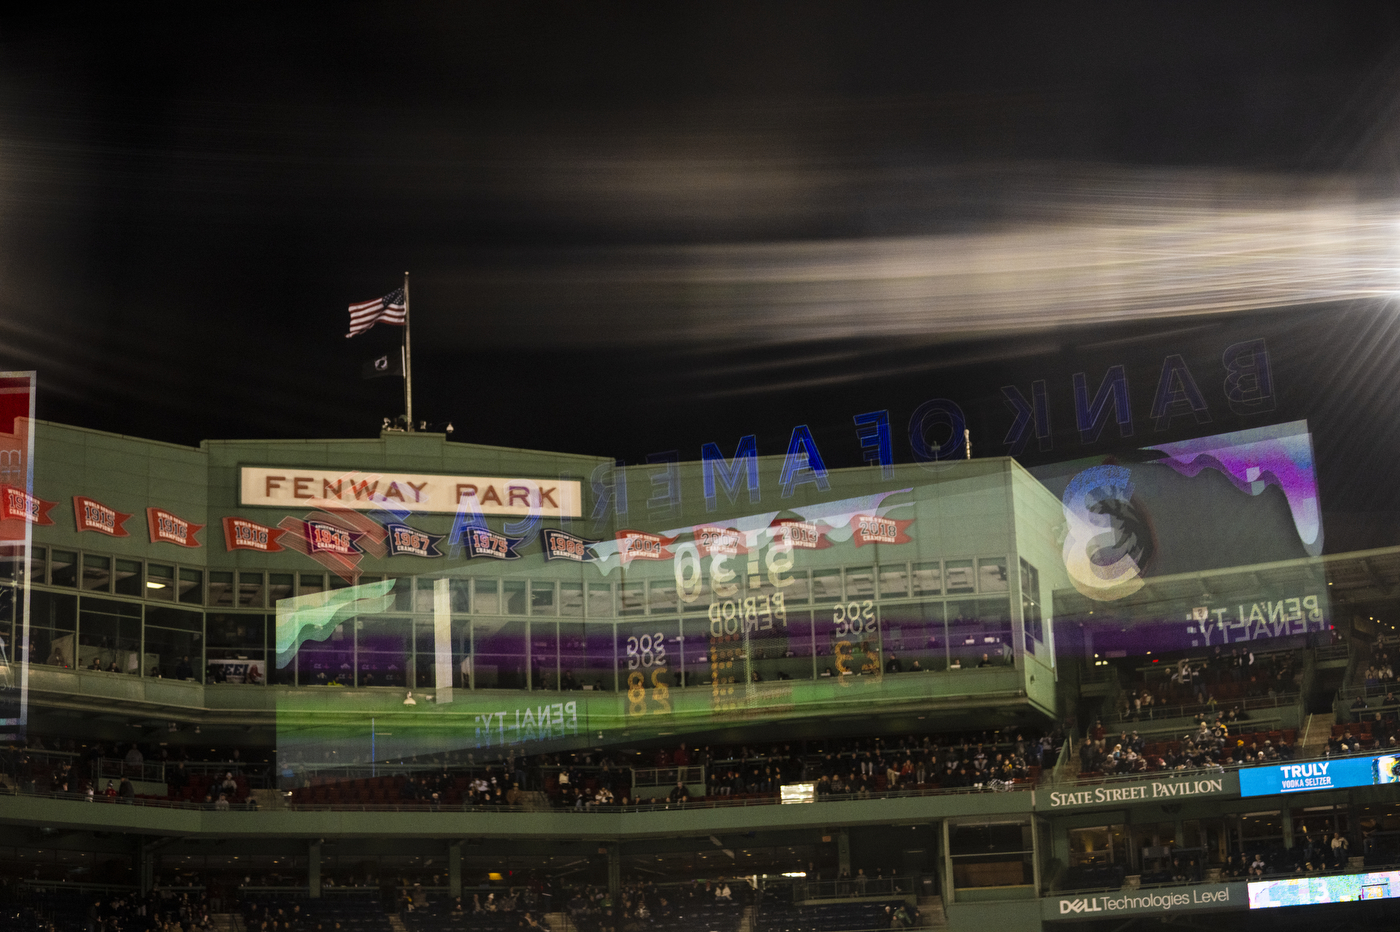 A blurred image of Fenway Park. 